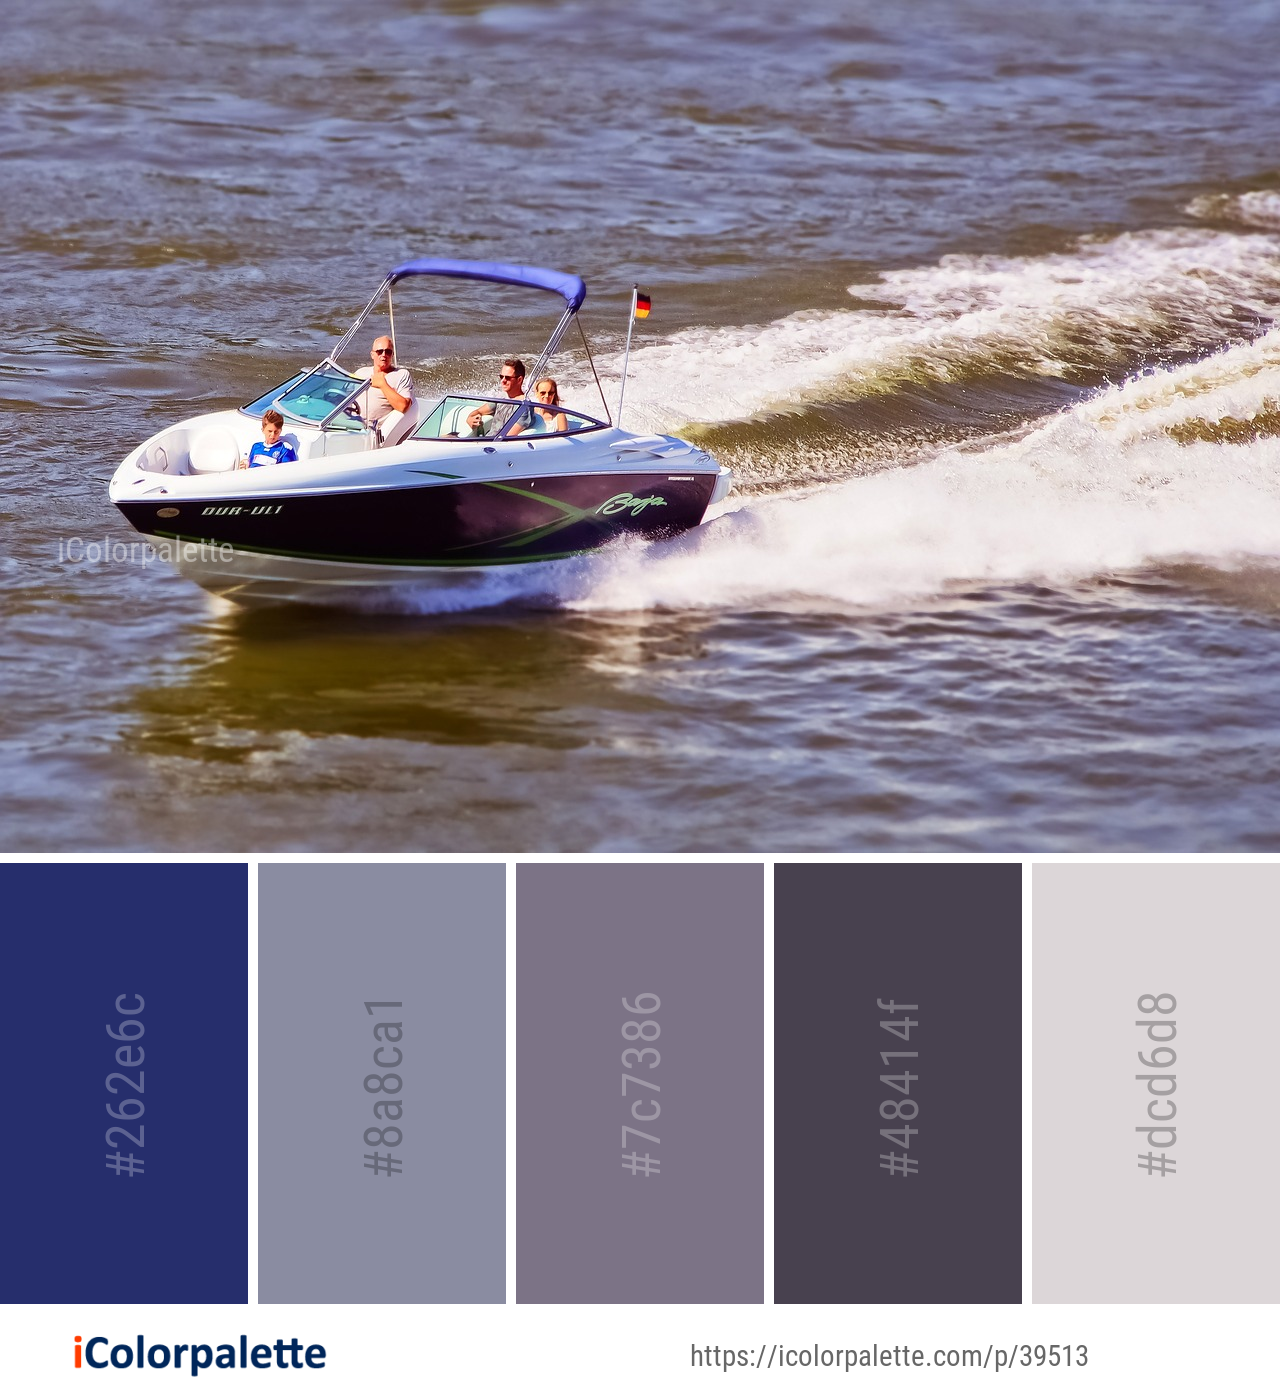 Color Palette Ideas from Boat Water Transportation Image